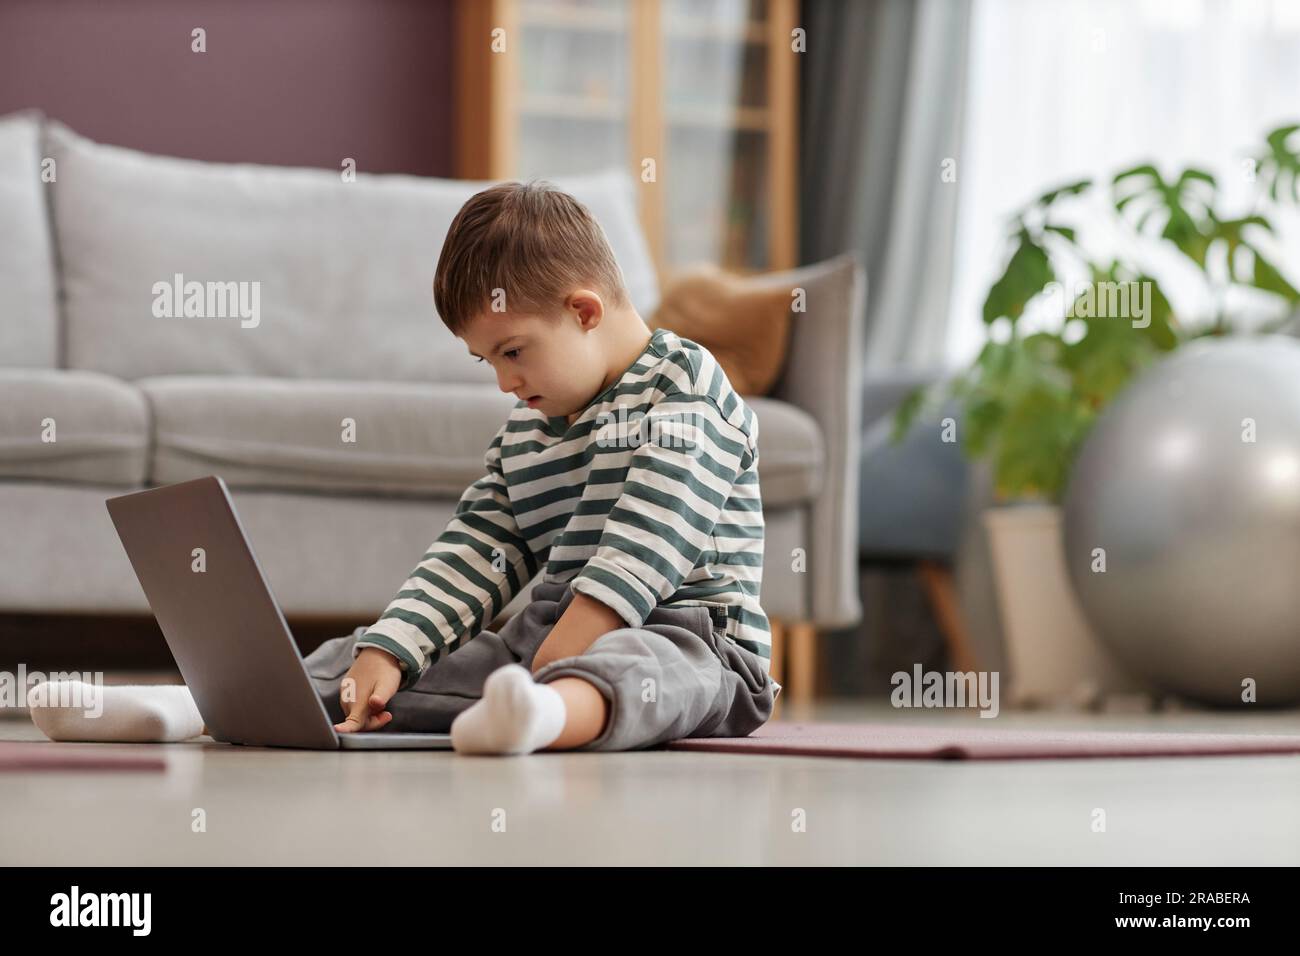 Side view portrait of curious little boy with down syndrome using laptop computer while sitting on floor at home, copy space Stock Photo